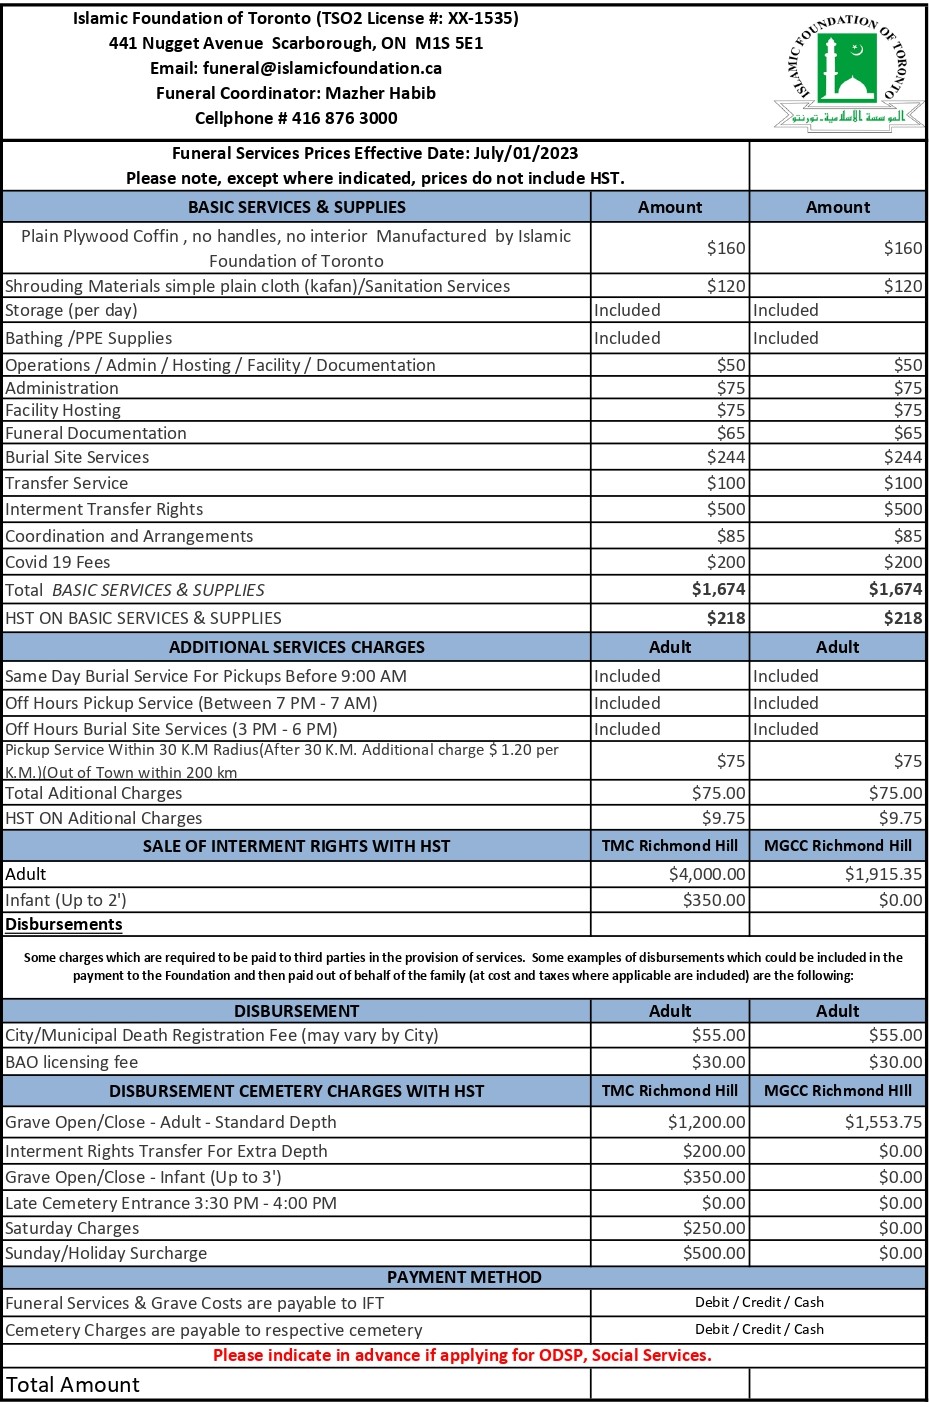 Calculated Funeral Services Price List 123.jpg